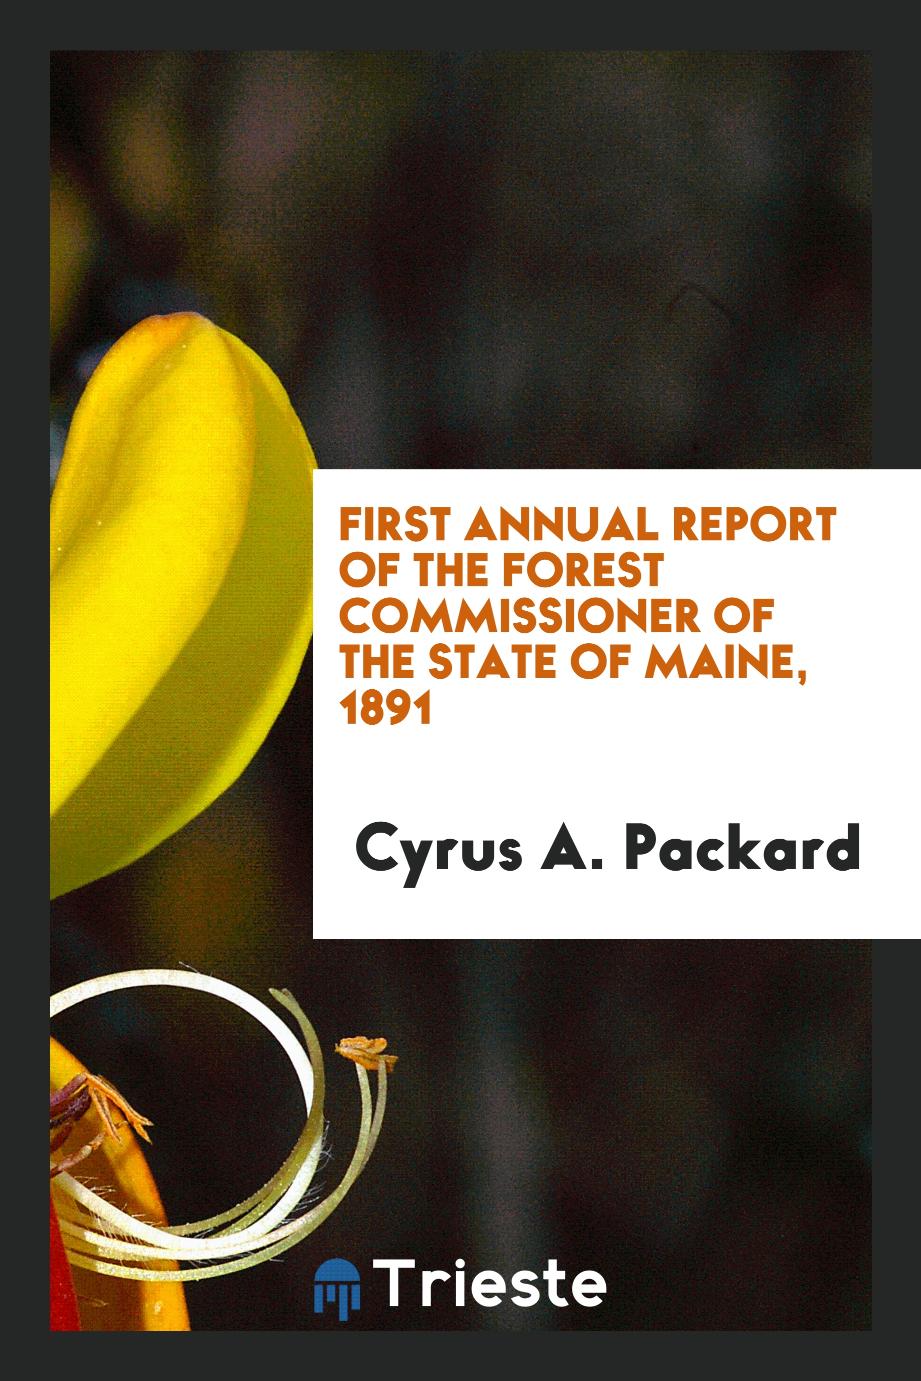 First Annual report of the Forest Commissioner of the state of Maine, 1891